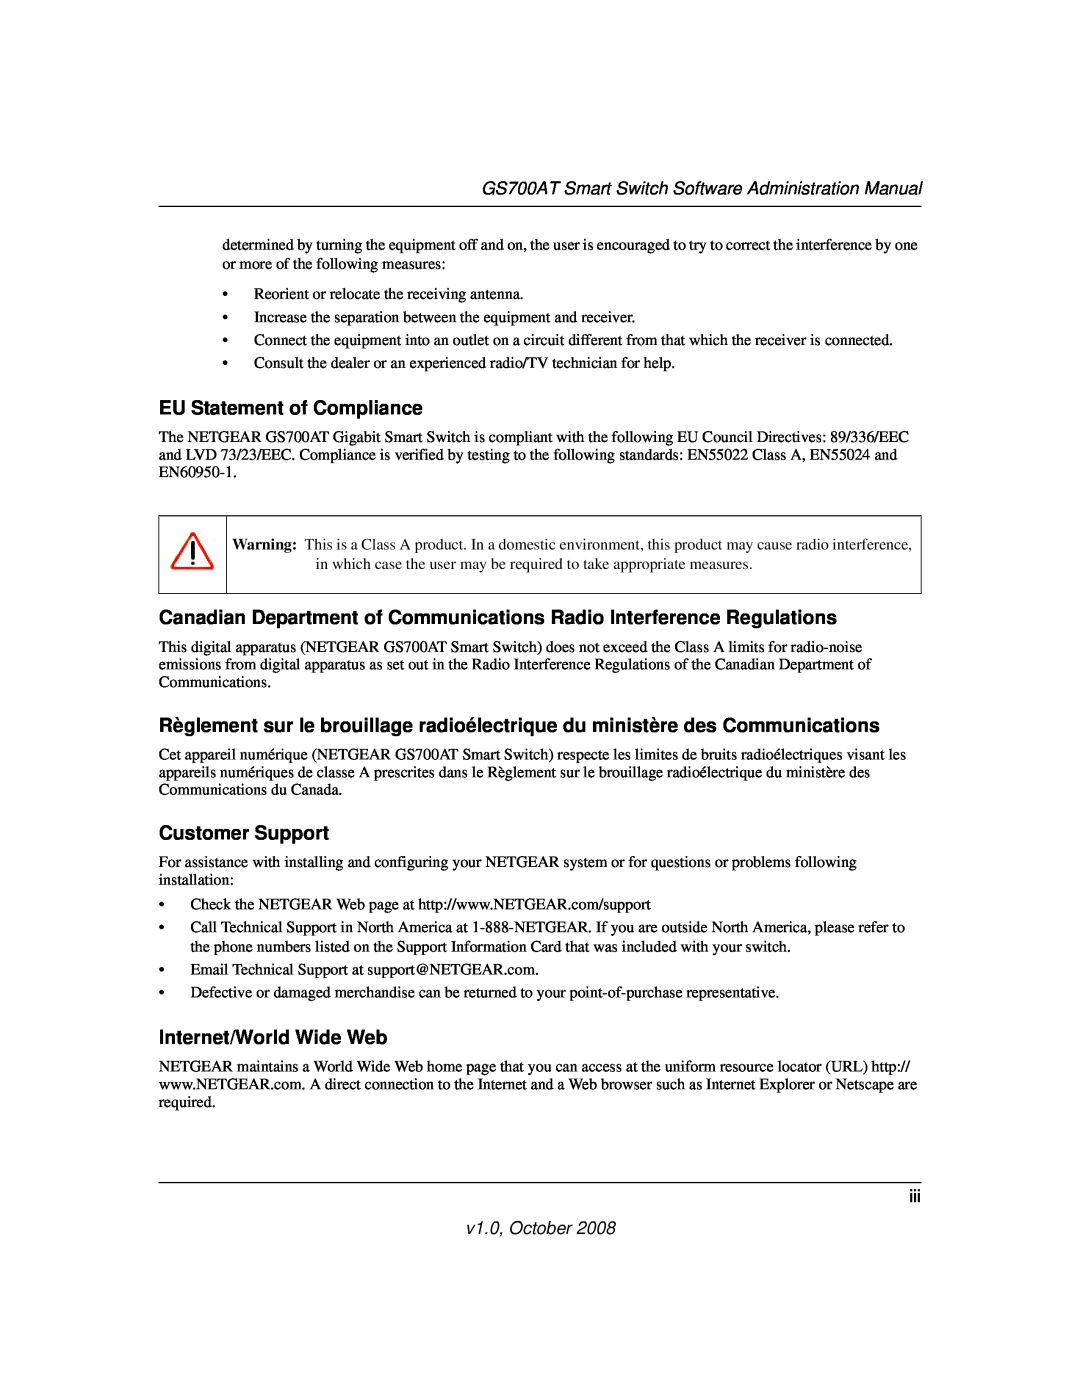 NETGEAR GS700AT manual EU Statement of Compliance, Canadian Department of Communications Radio Interference Regulations 